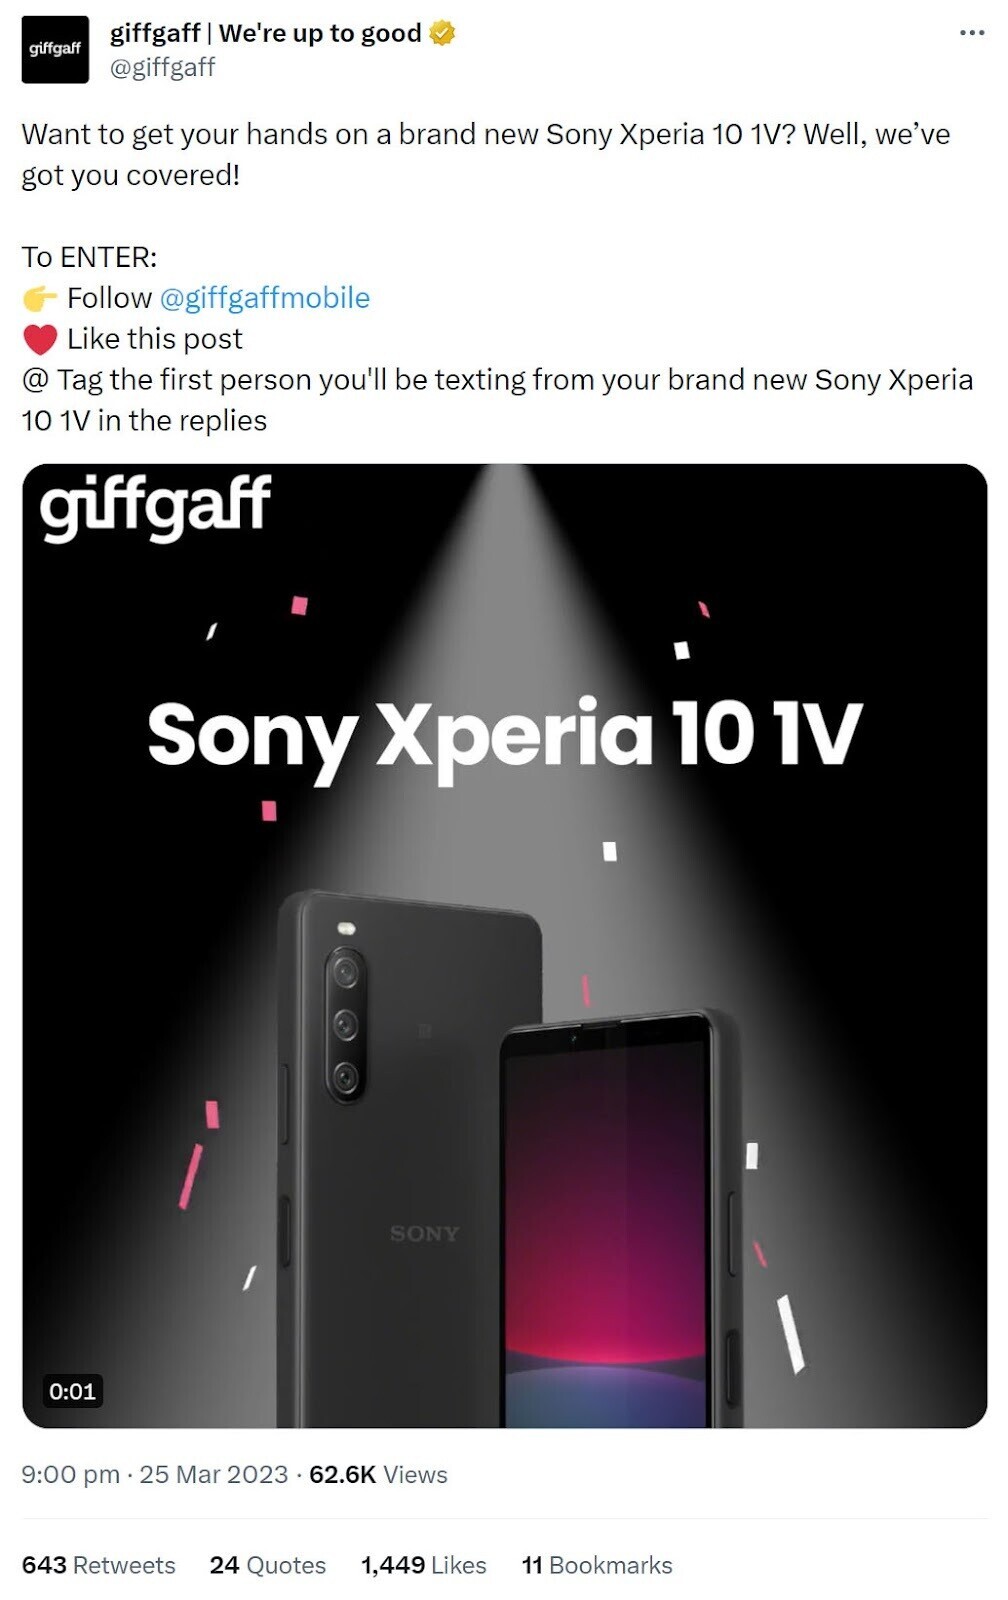 Twitter post by GiffGaff promoting Sony Xperia 10 1V